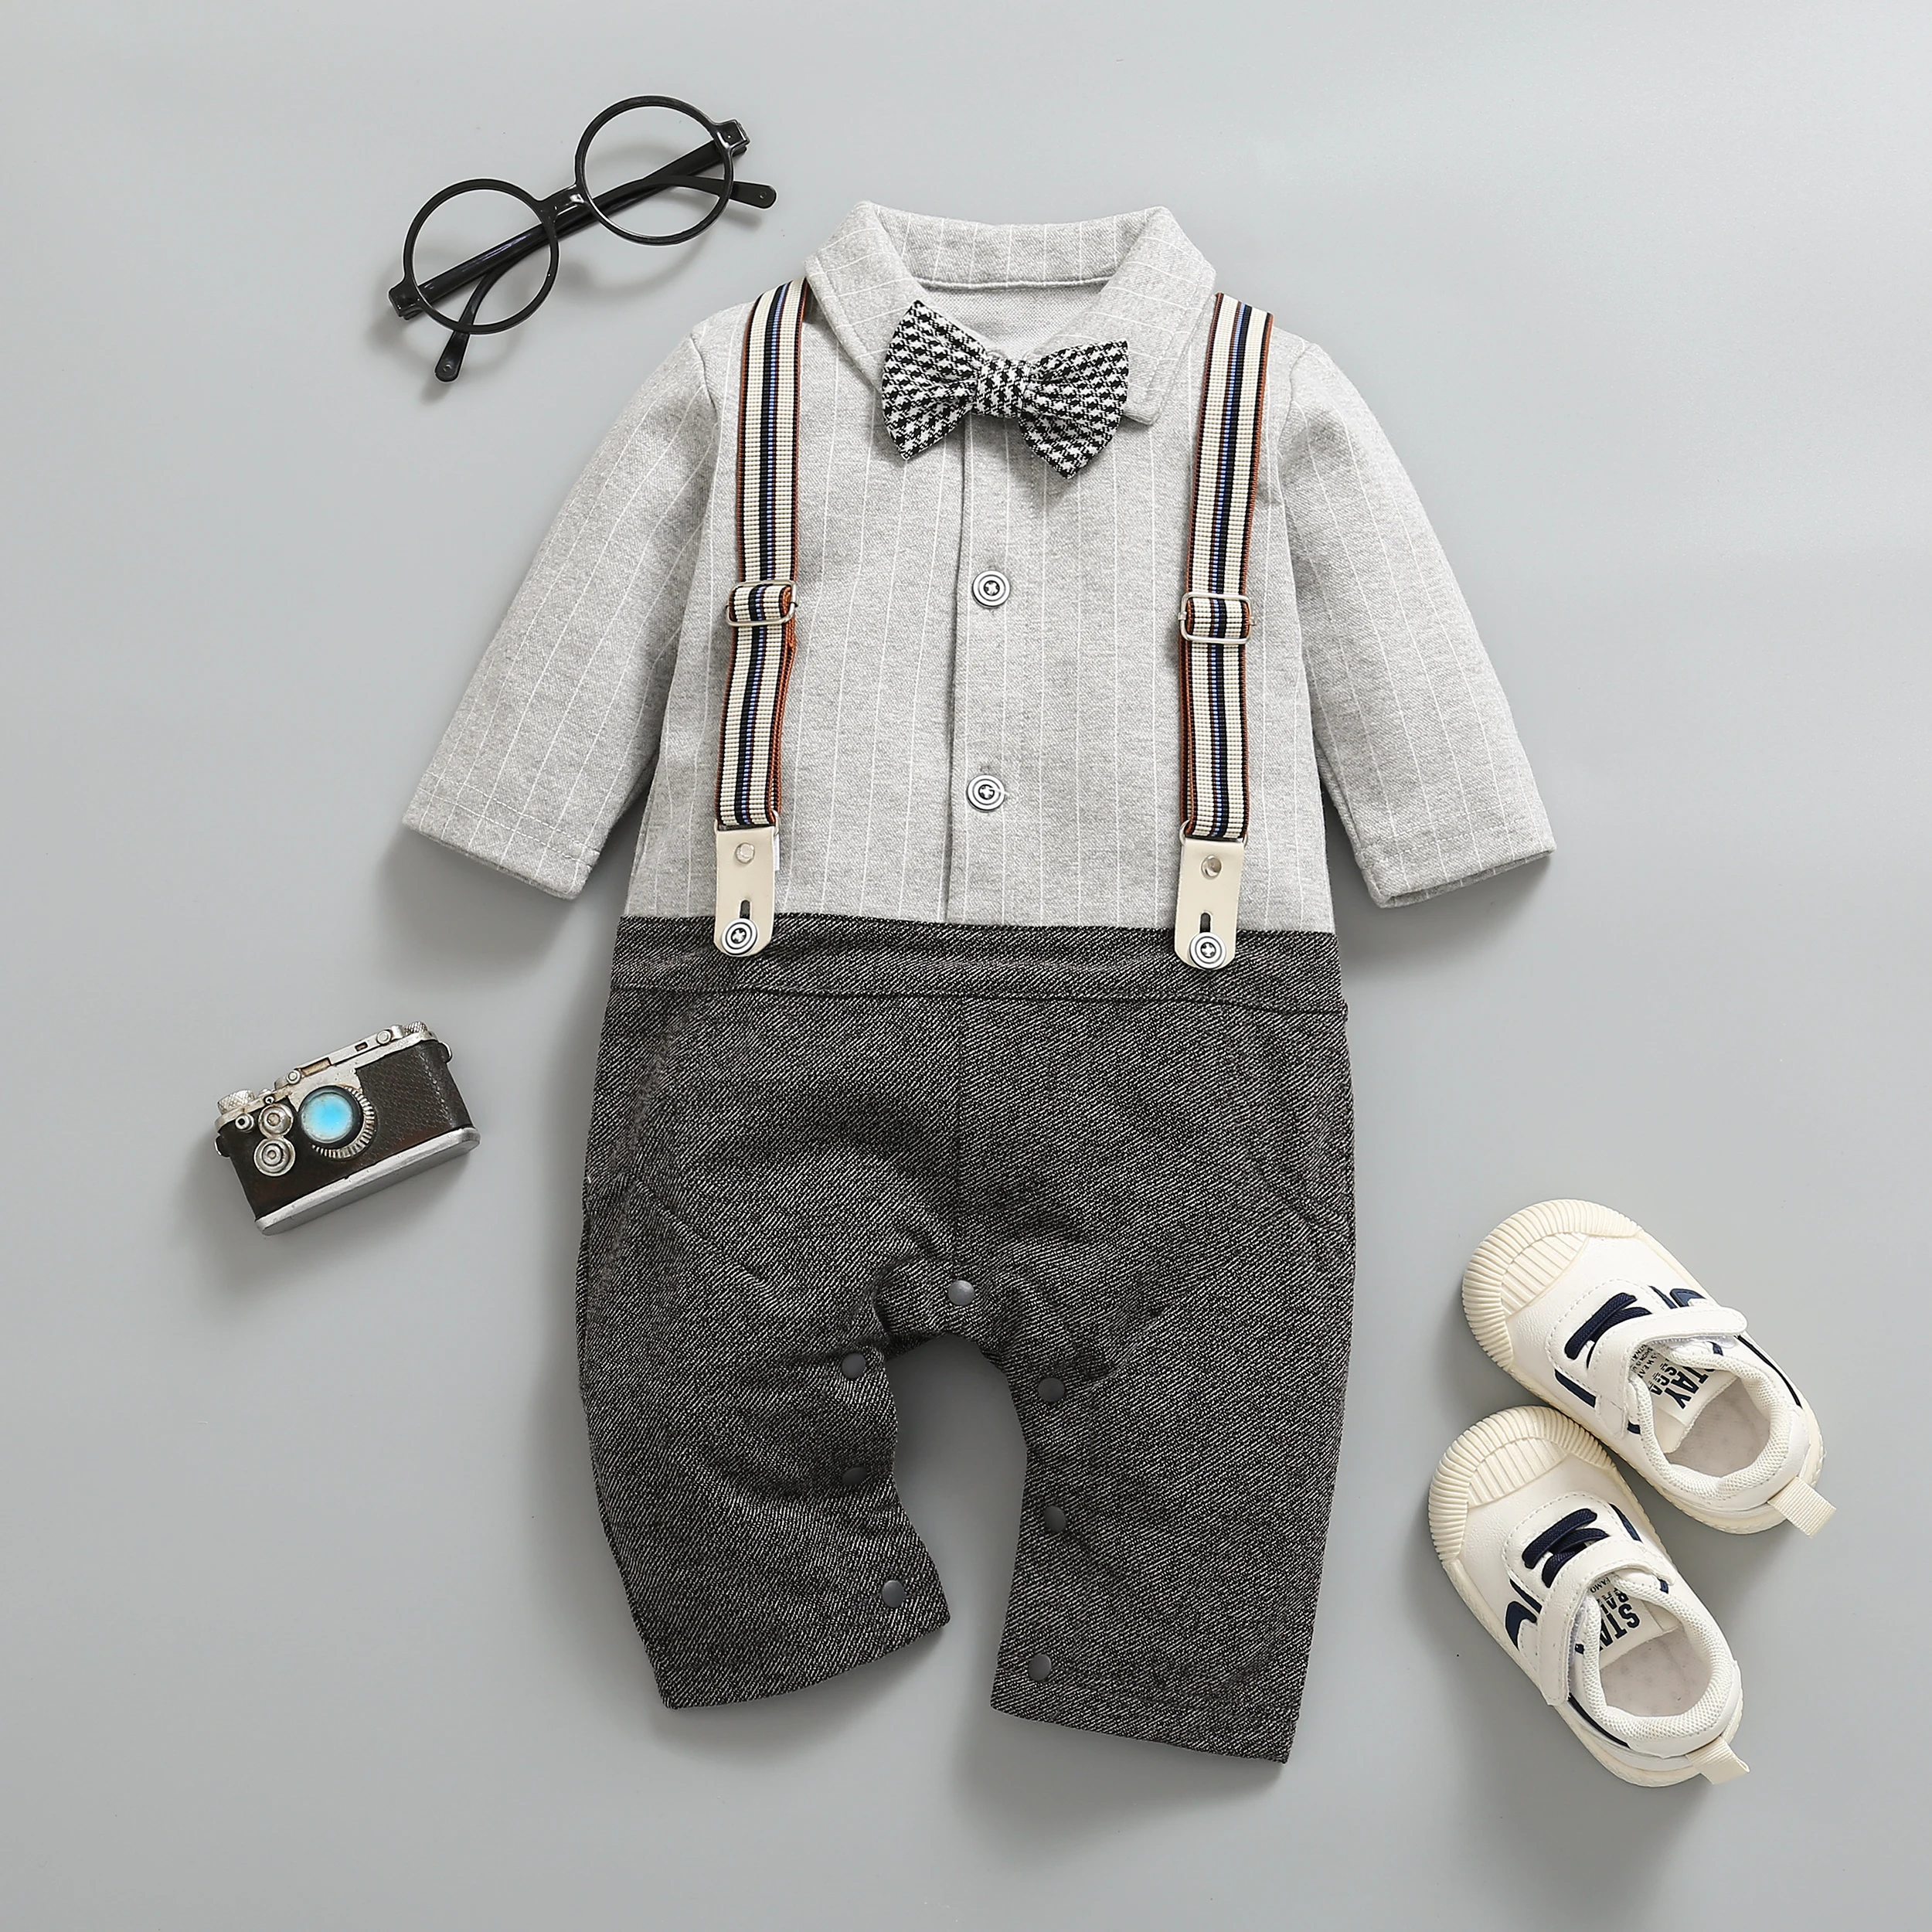 BINGOBOOM Newborn Baby Boy Romper Long Sleeves Infant Plaid Bow Neck Style Bebe Clothes Little Gentle Man 2 In 1 Babe Jumpsuit